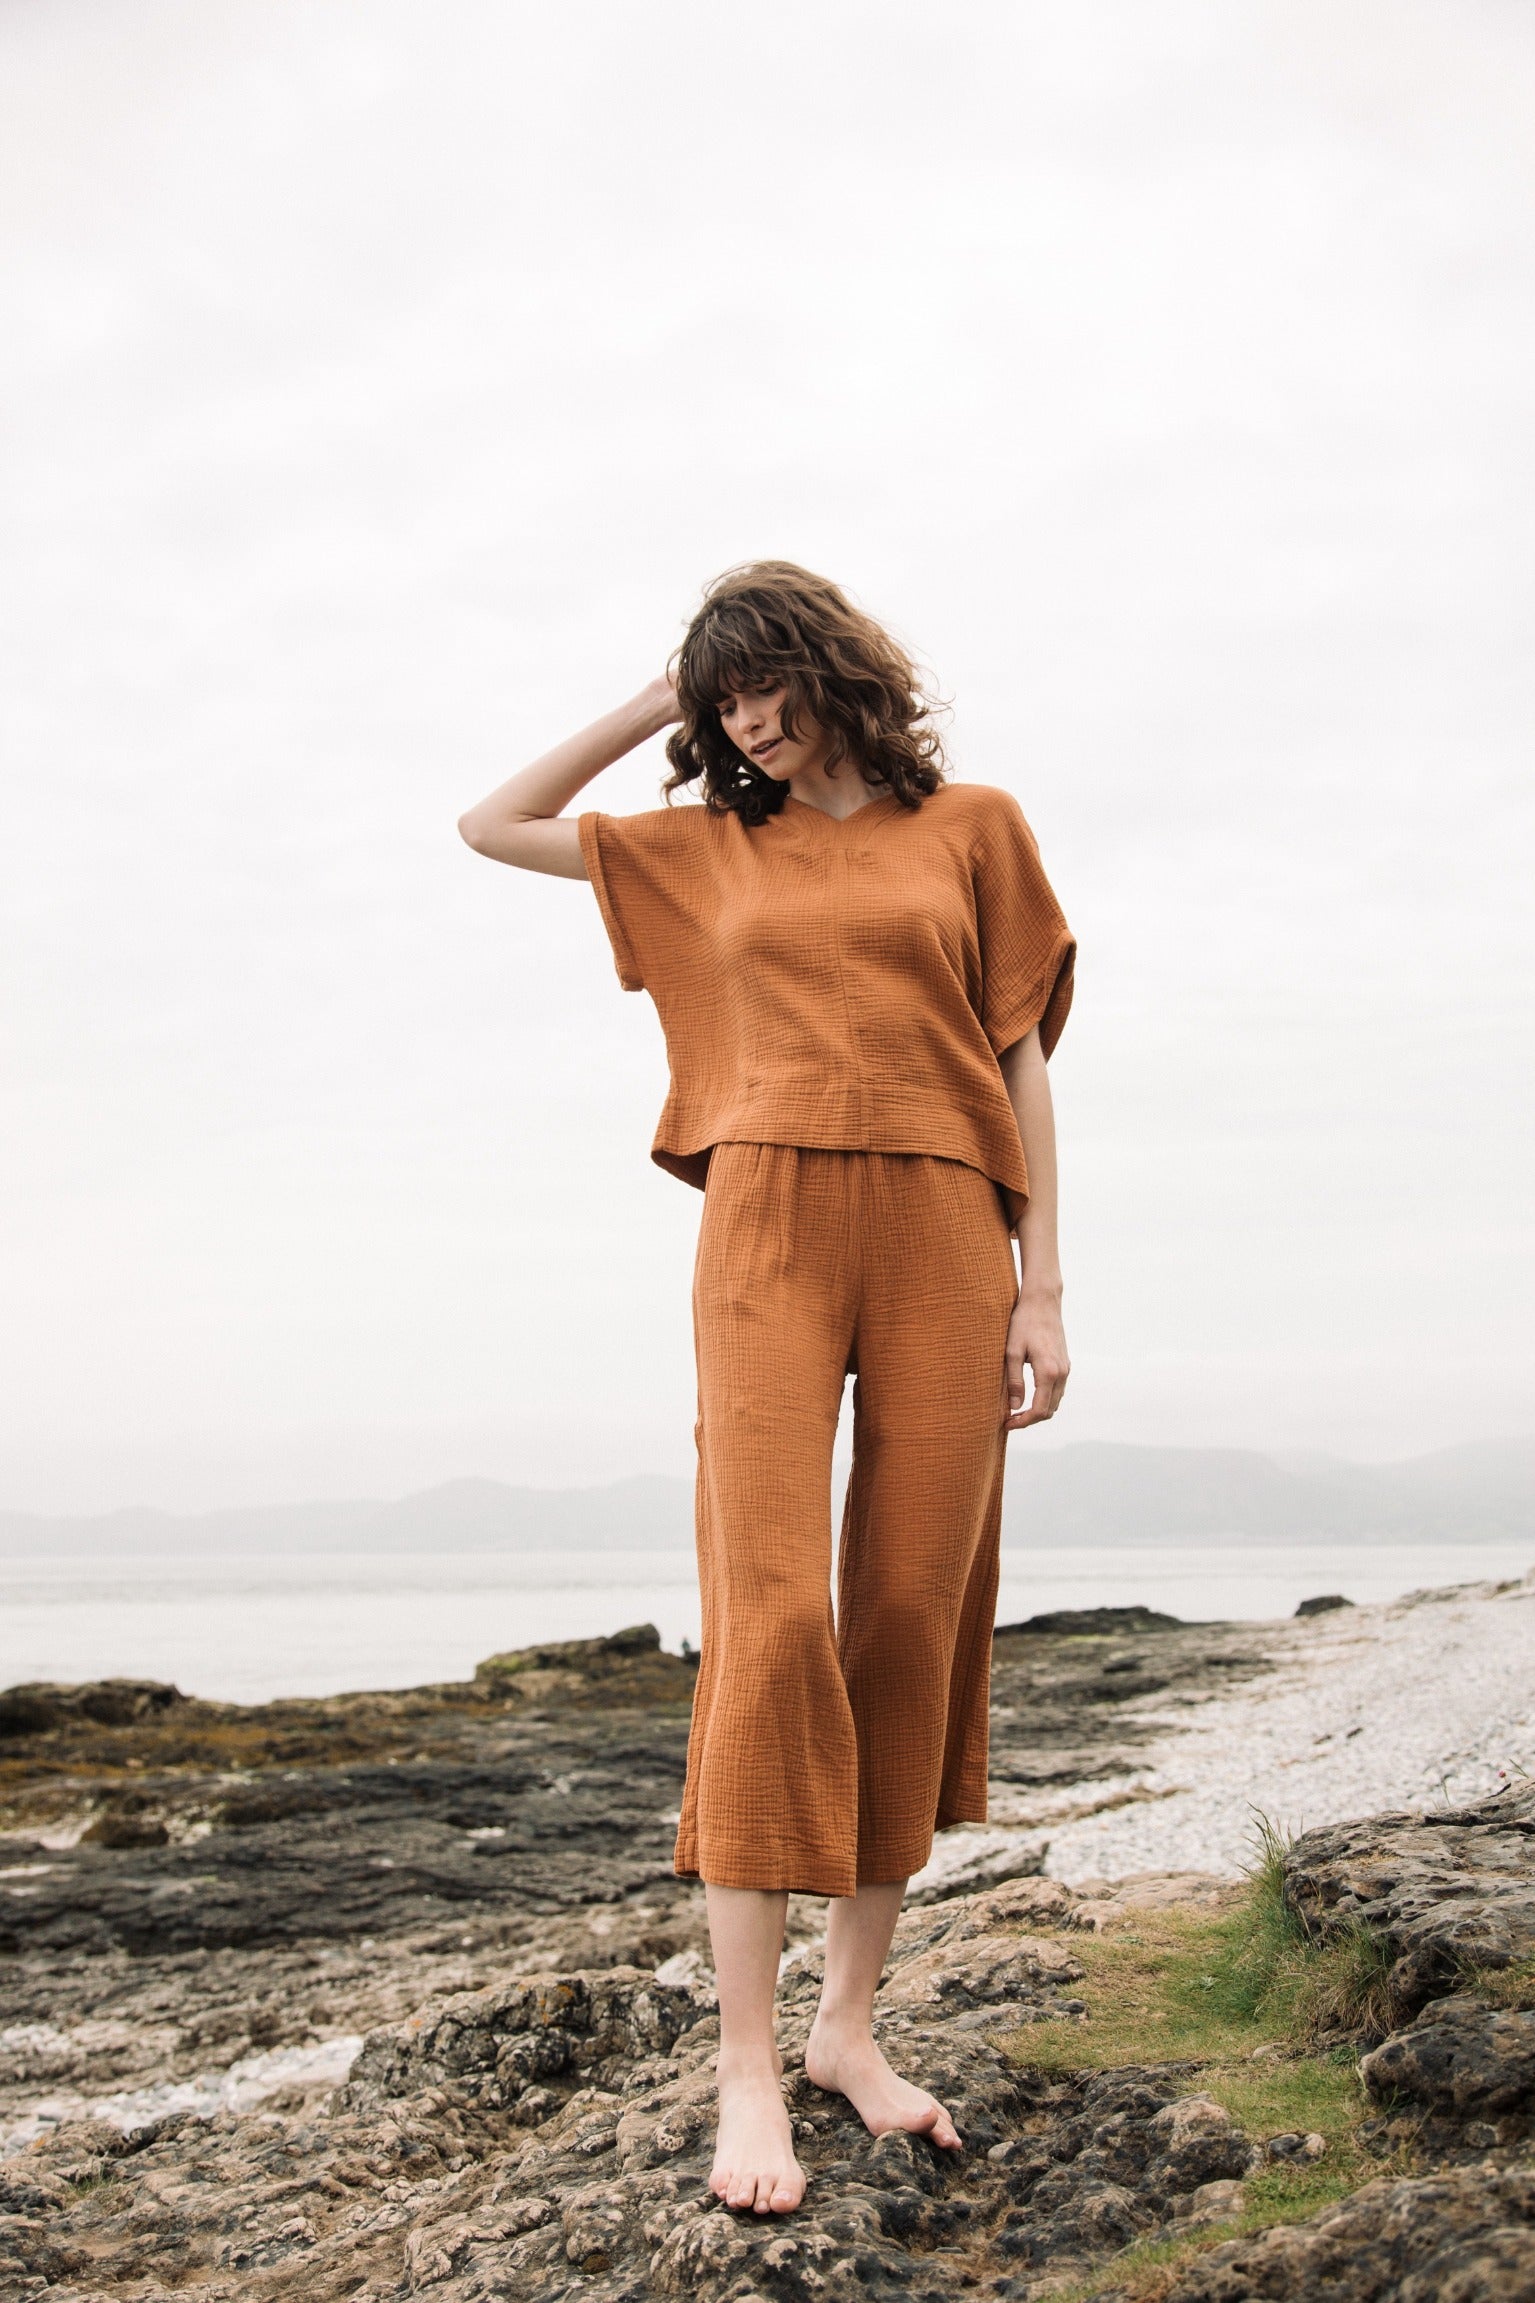 Evora Organic Cotton Trousers in Pecan by HANNAH BEAUMONT